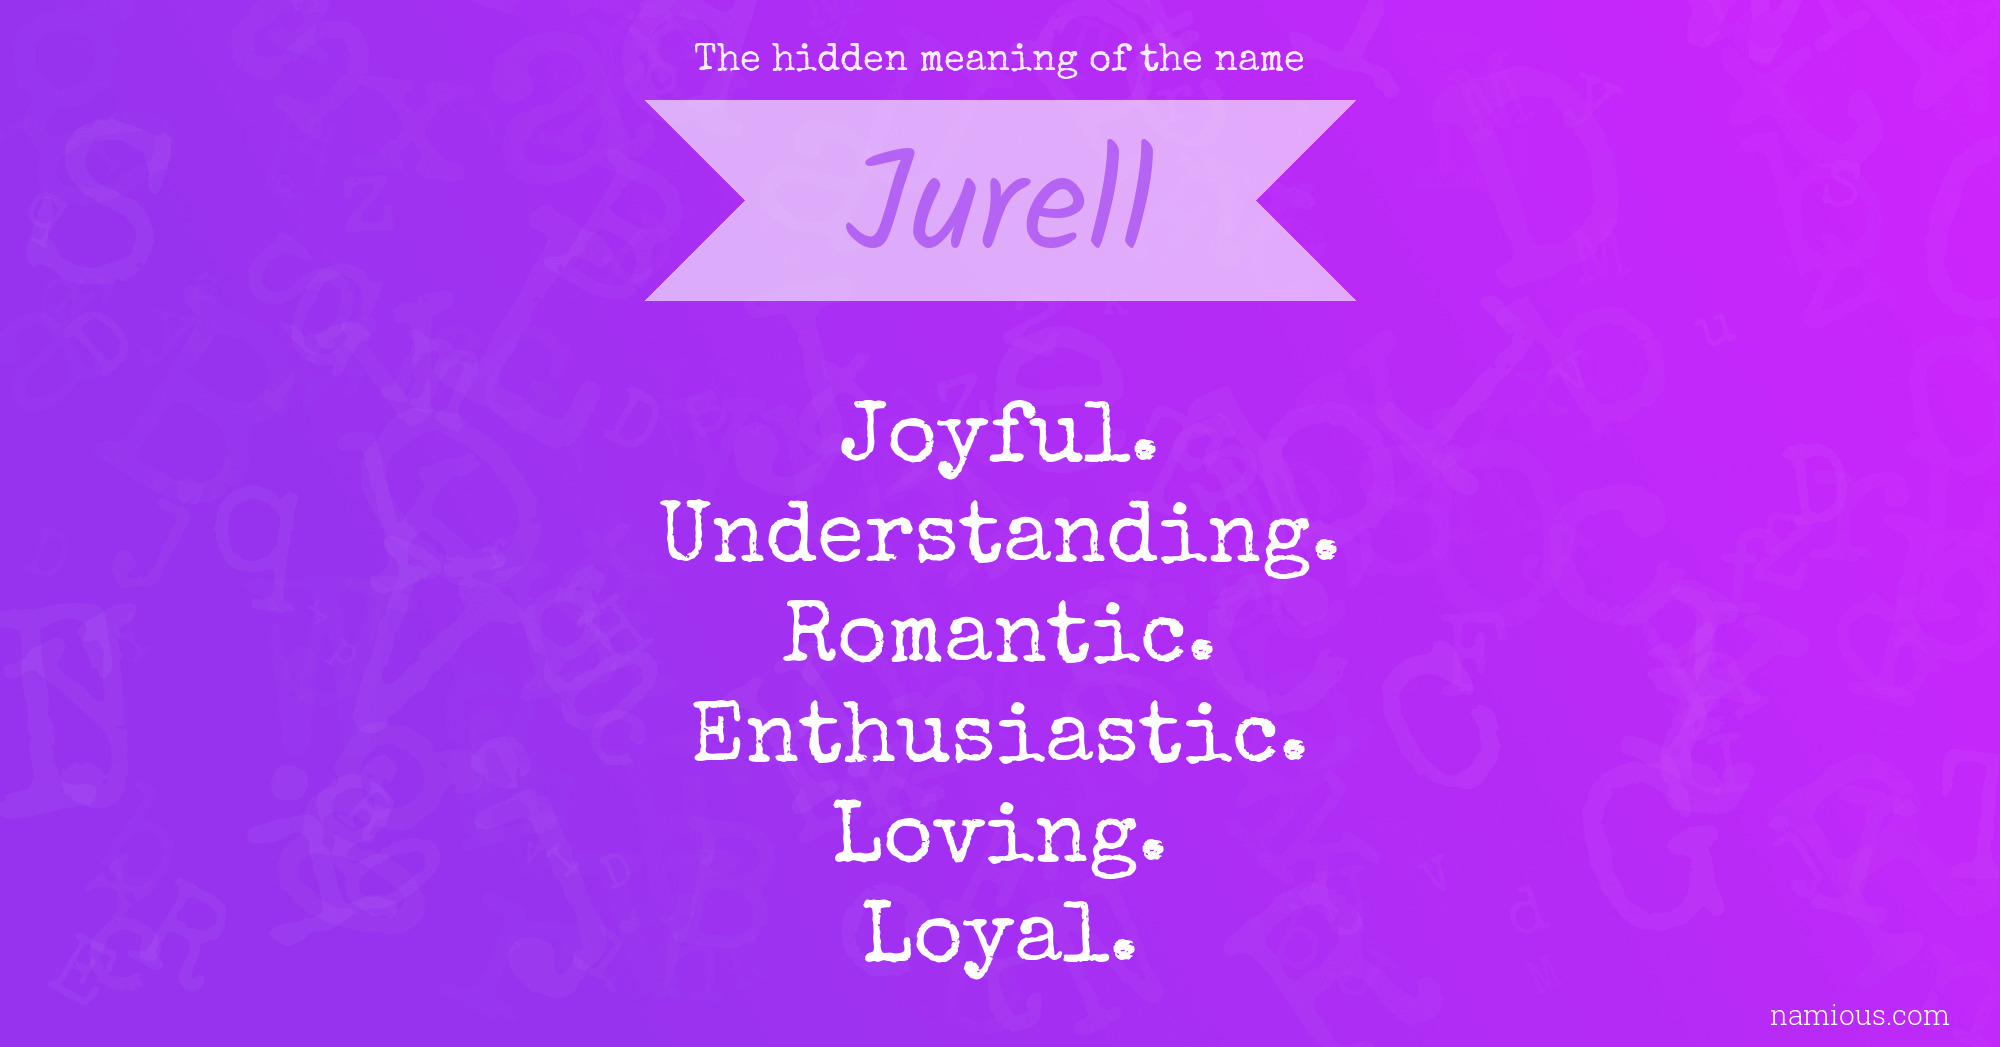 The hidden meaning of the name Jurell